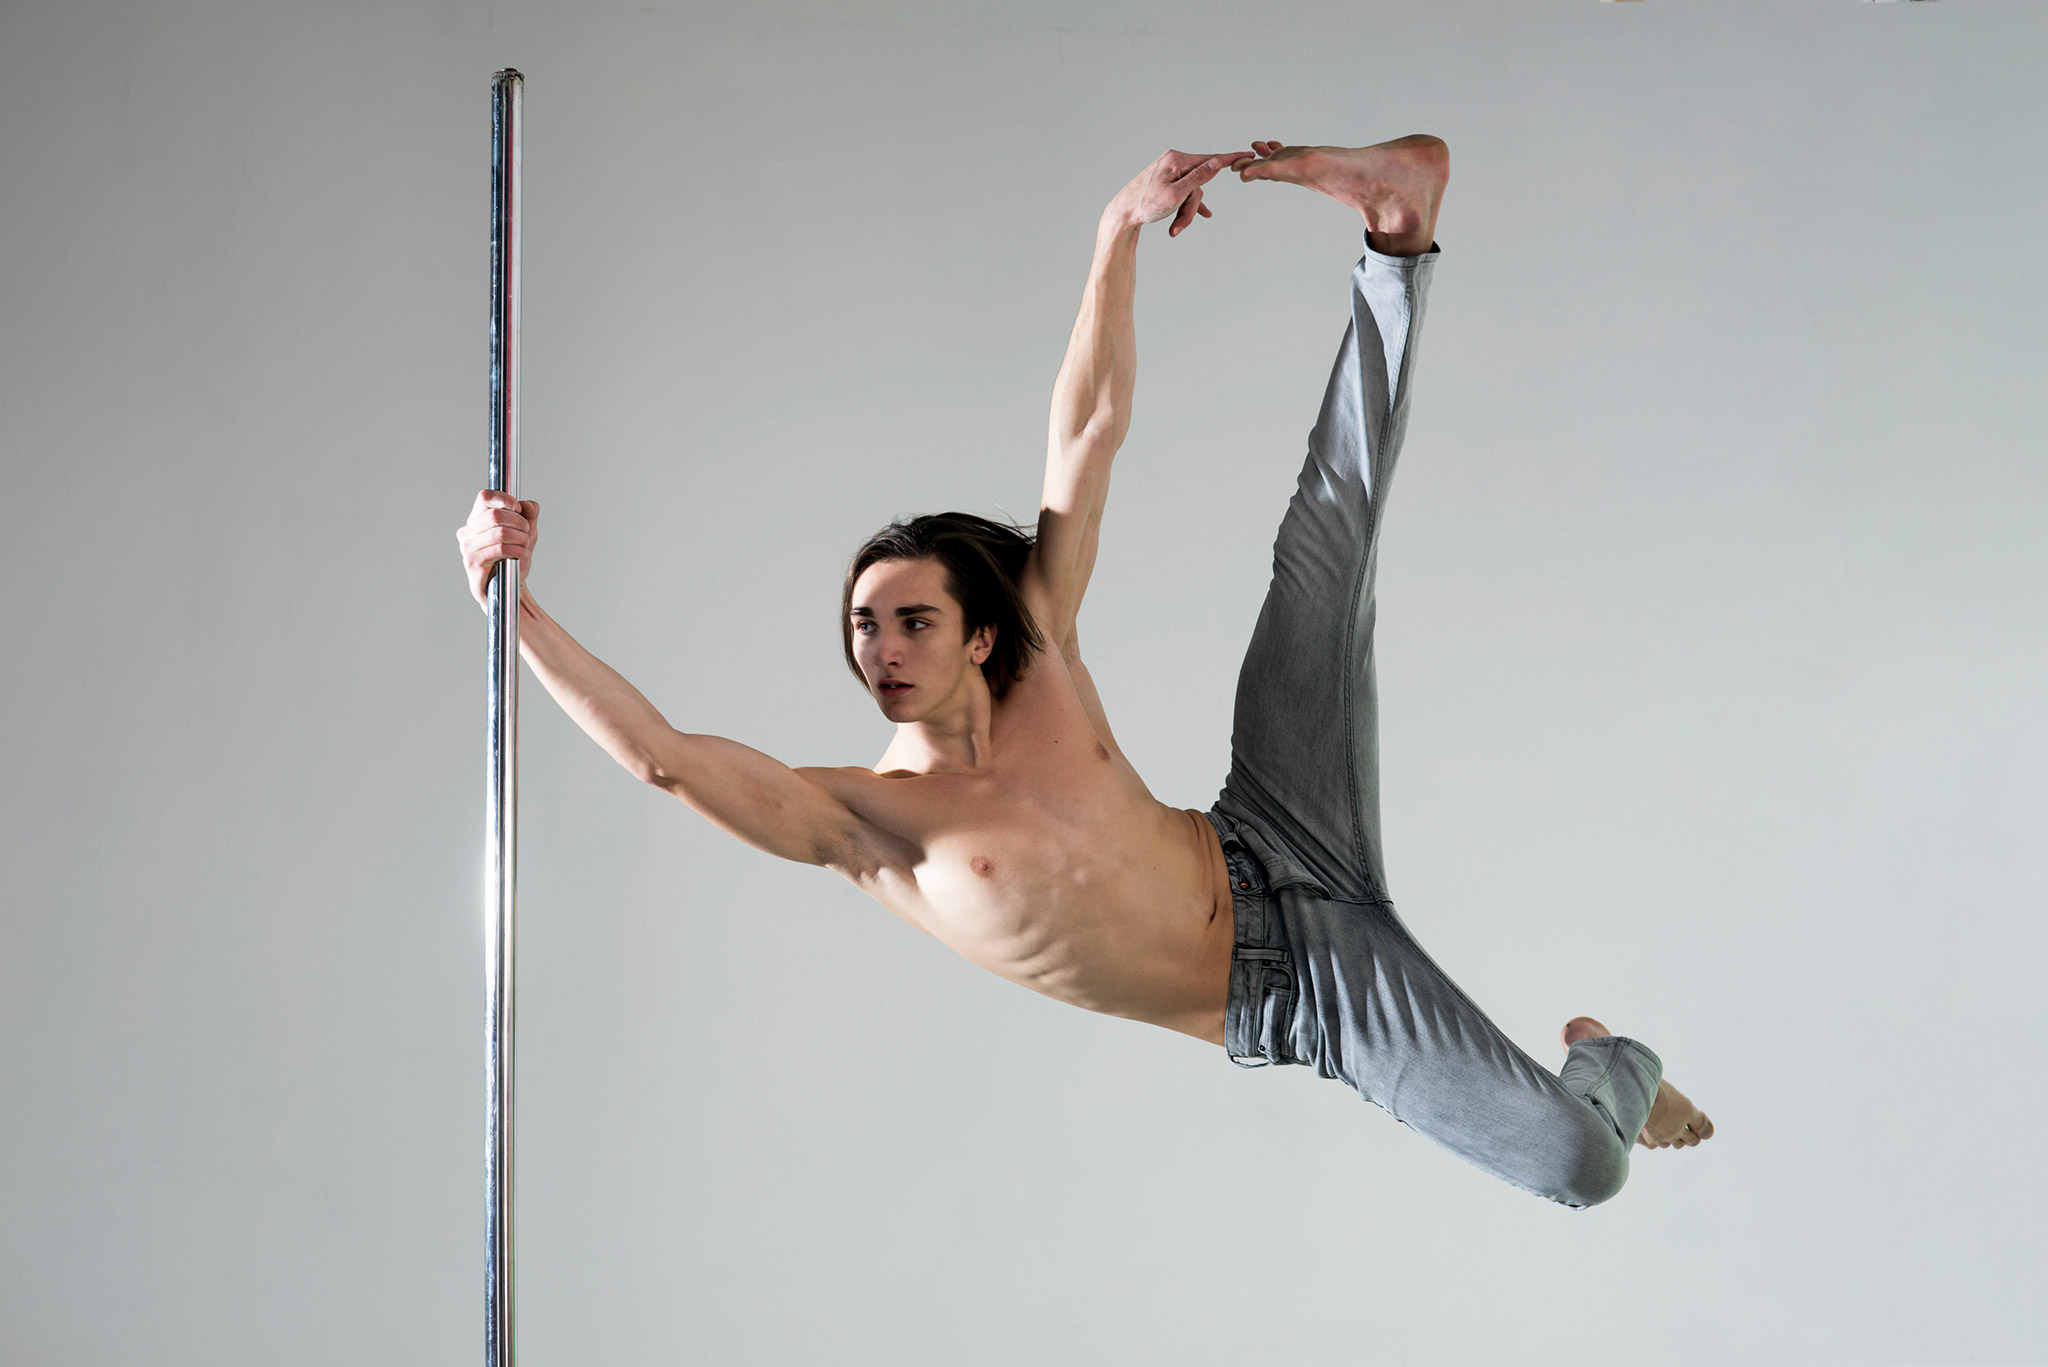 Is Pole Dancing Good For You?